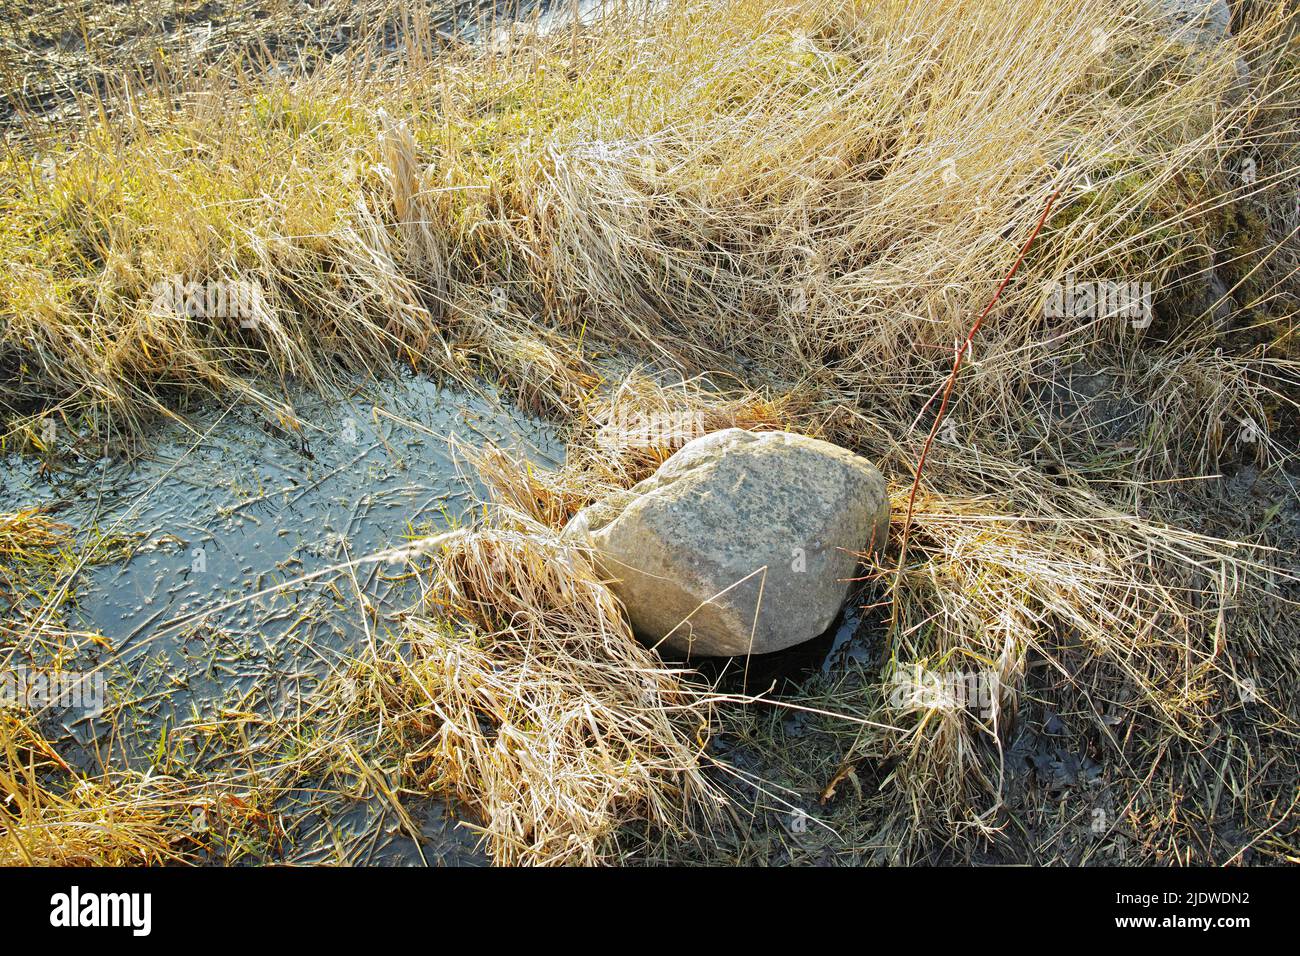 Dry arid grass and big rock on a swamp riverbed in Jutland, Denmark. Rustic nature landscape and background of uncultivated marshland with reeds Stock Photo